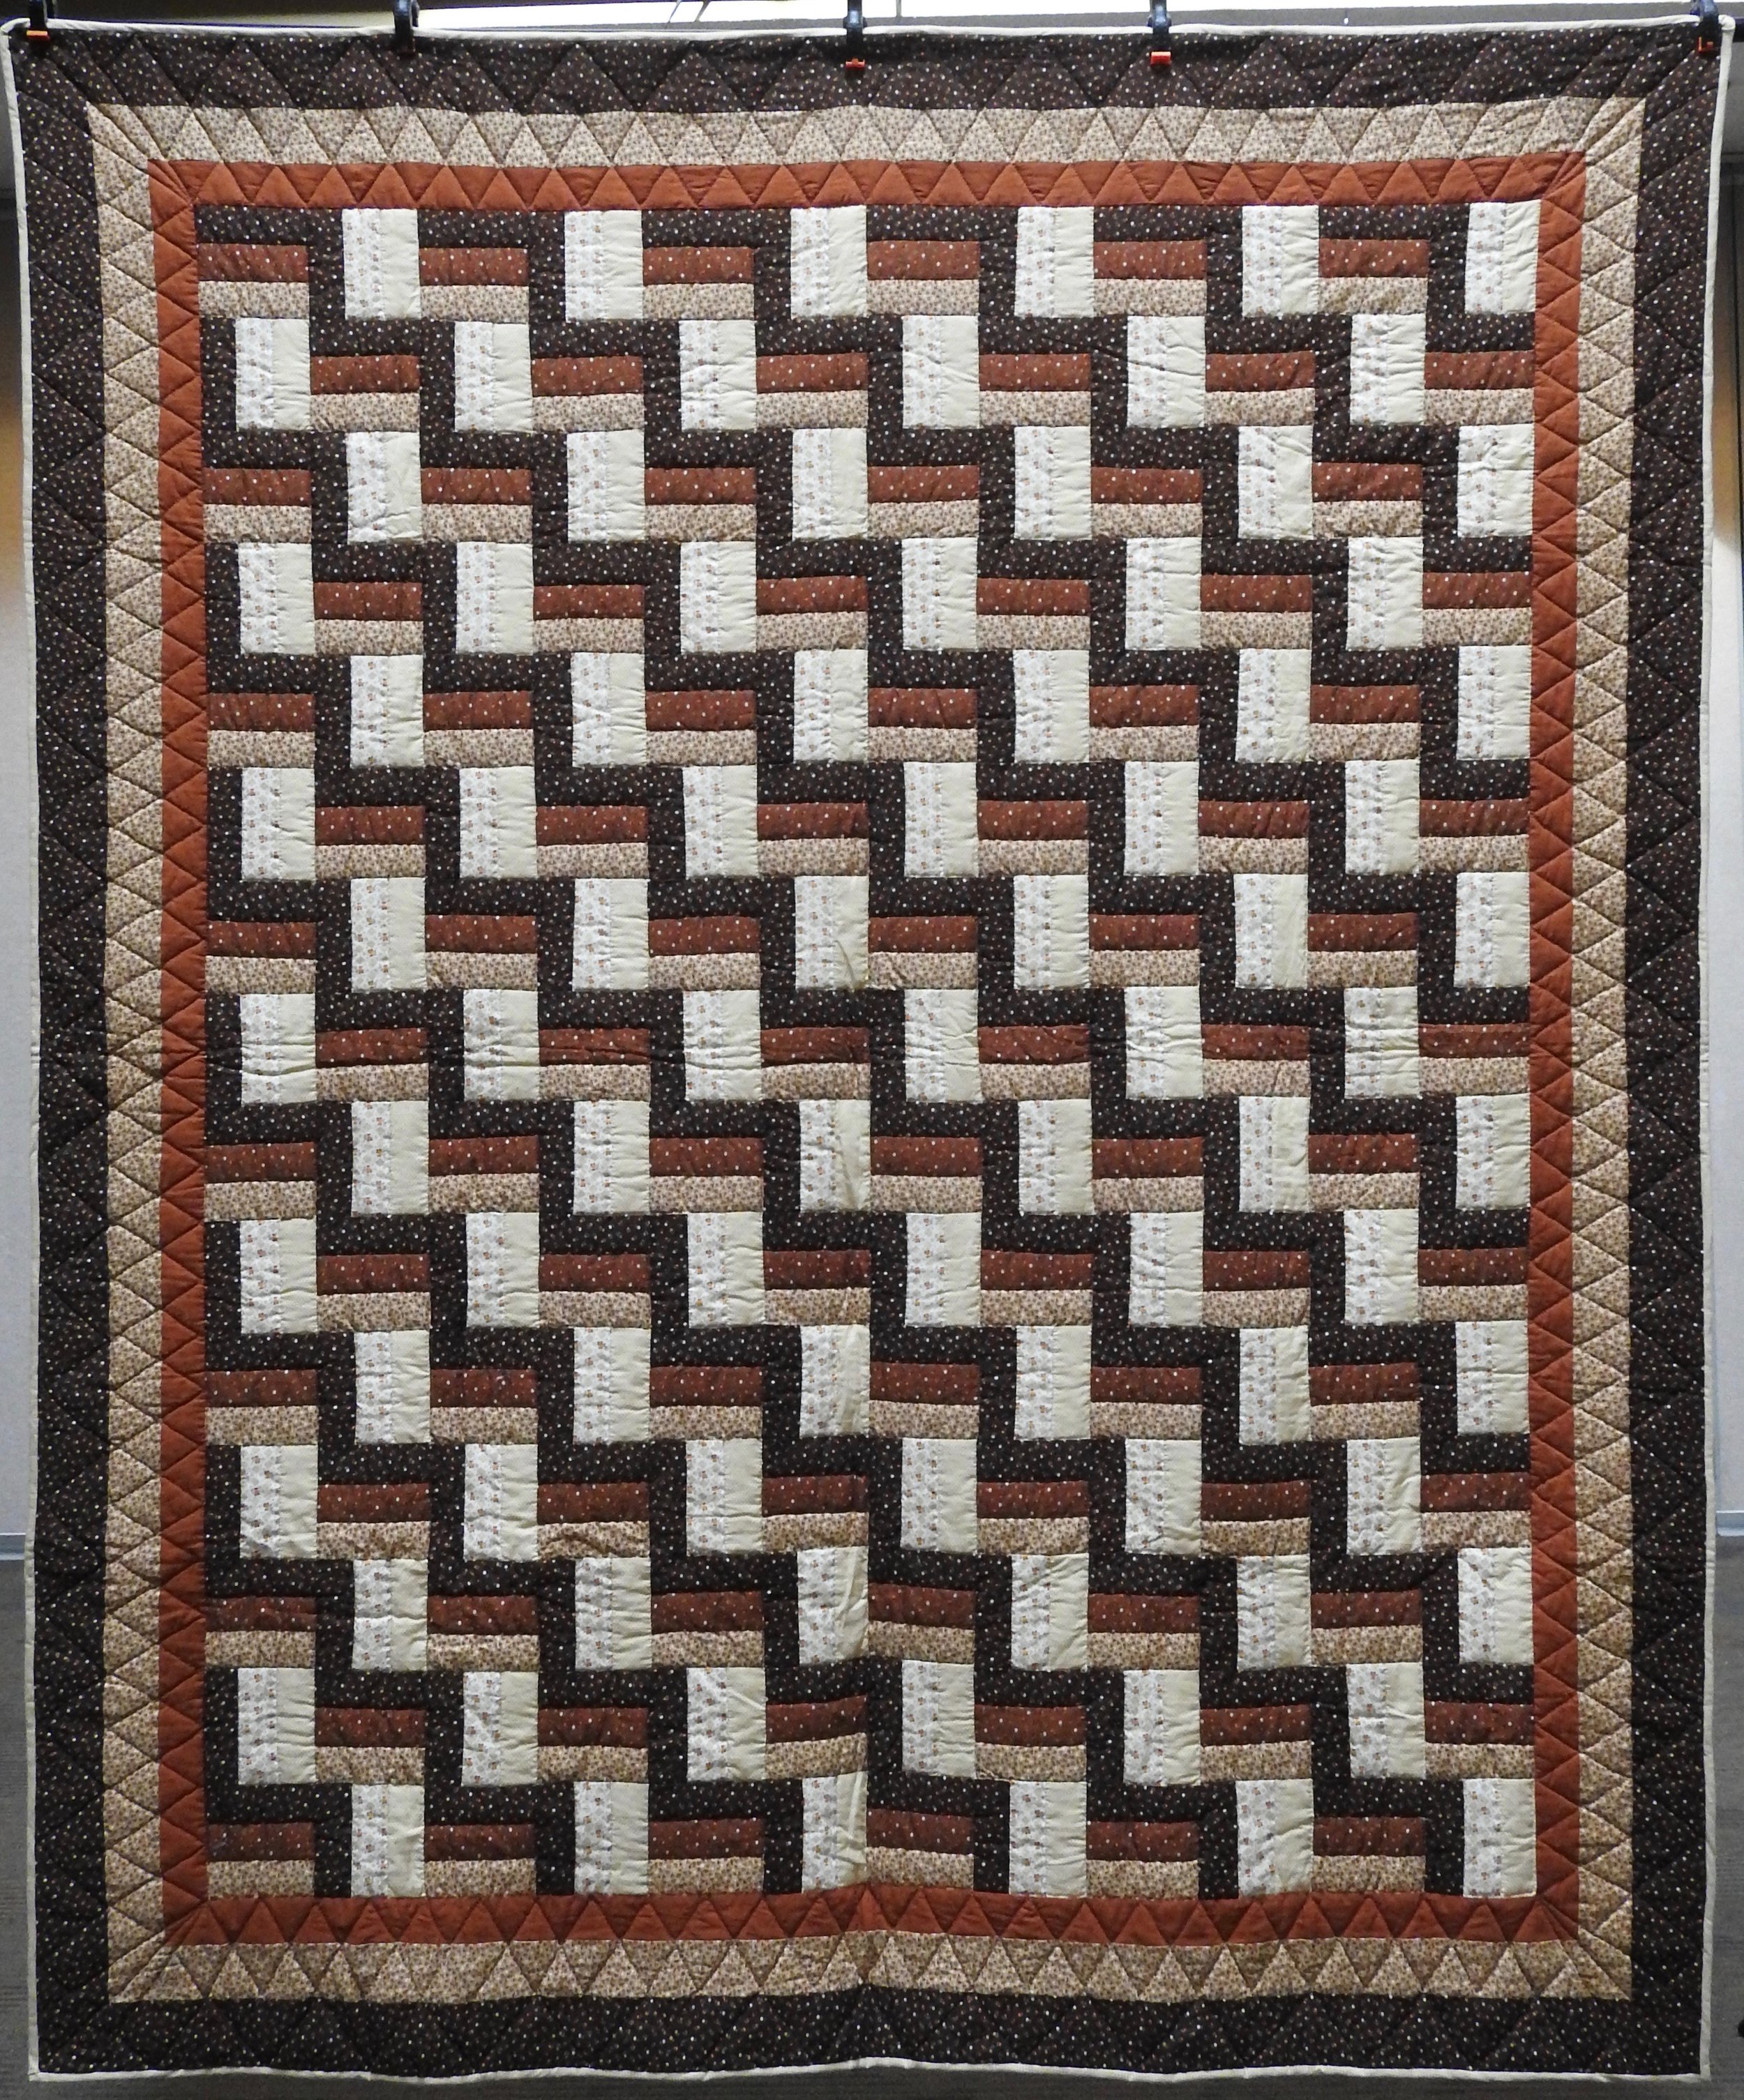  Woodsy Zig Zag 1, Pieced, Hand Quilted, donated by Lias Graber, 77 x 93